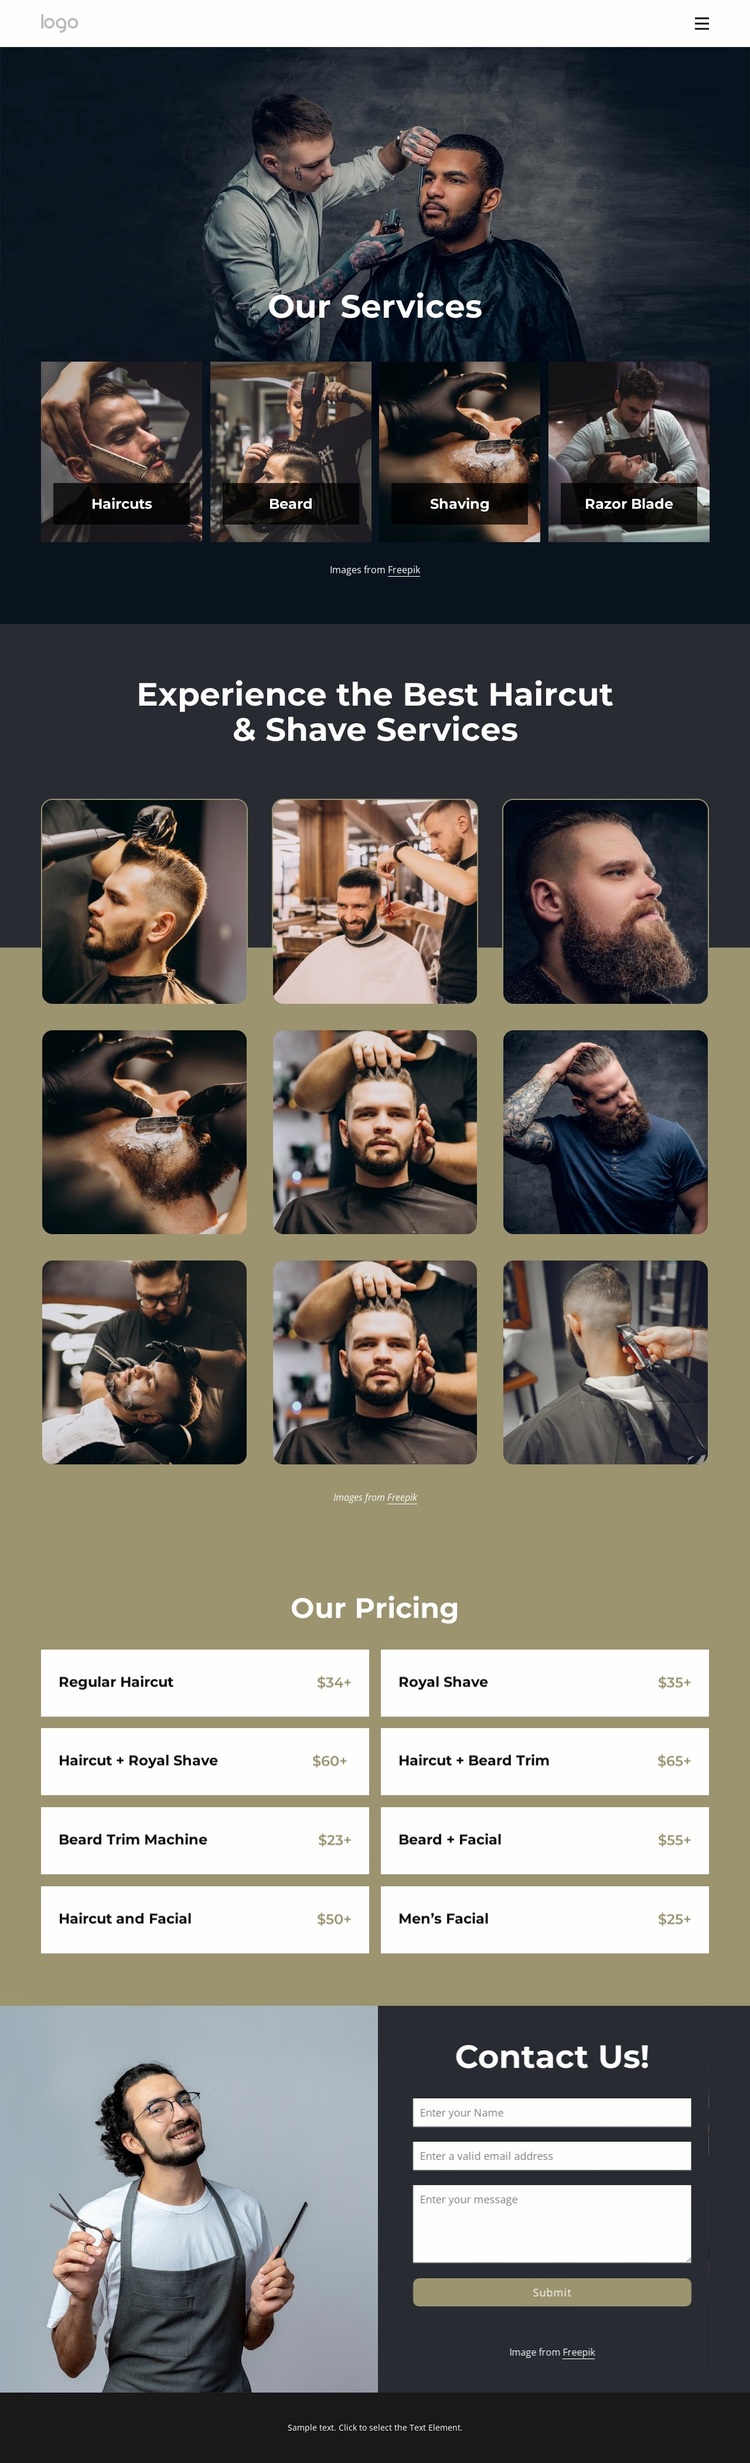 Best haircut and shave services Website Design